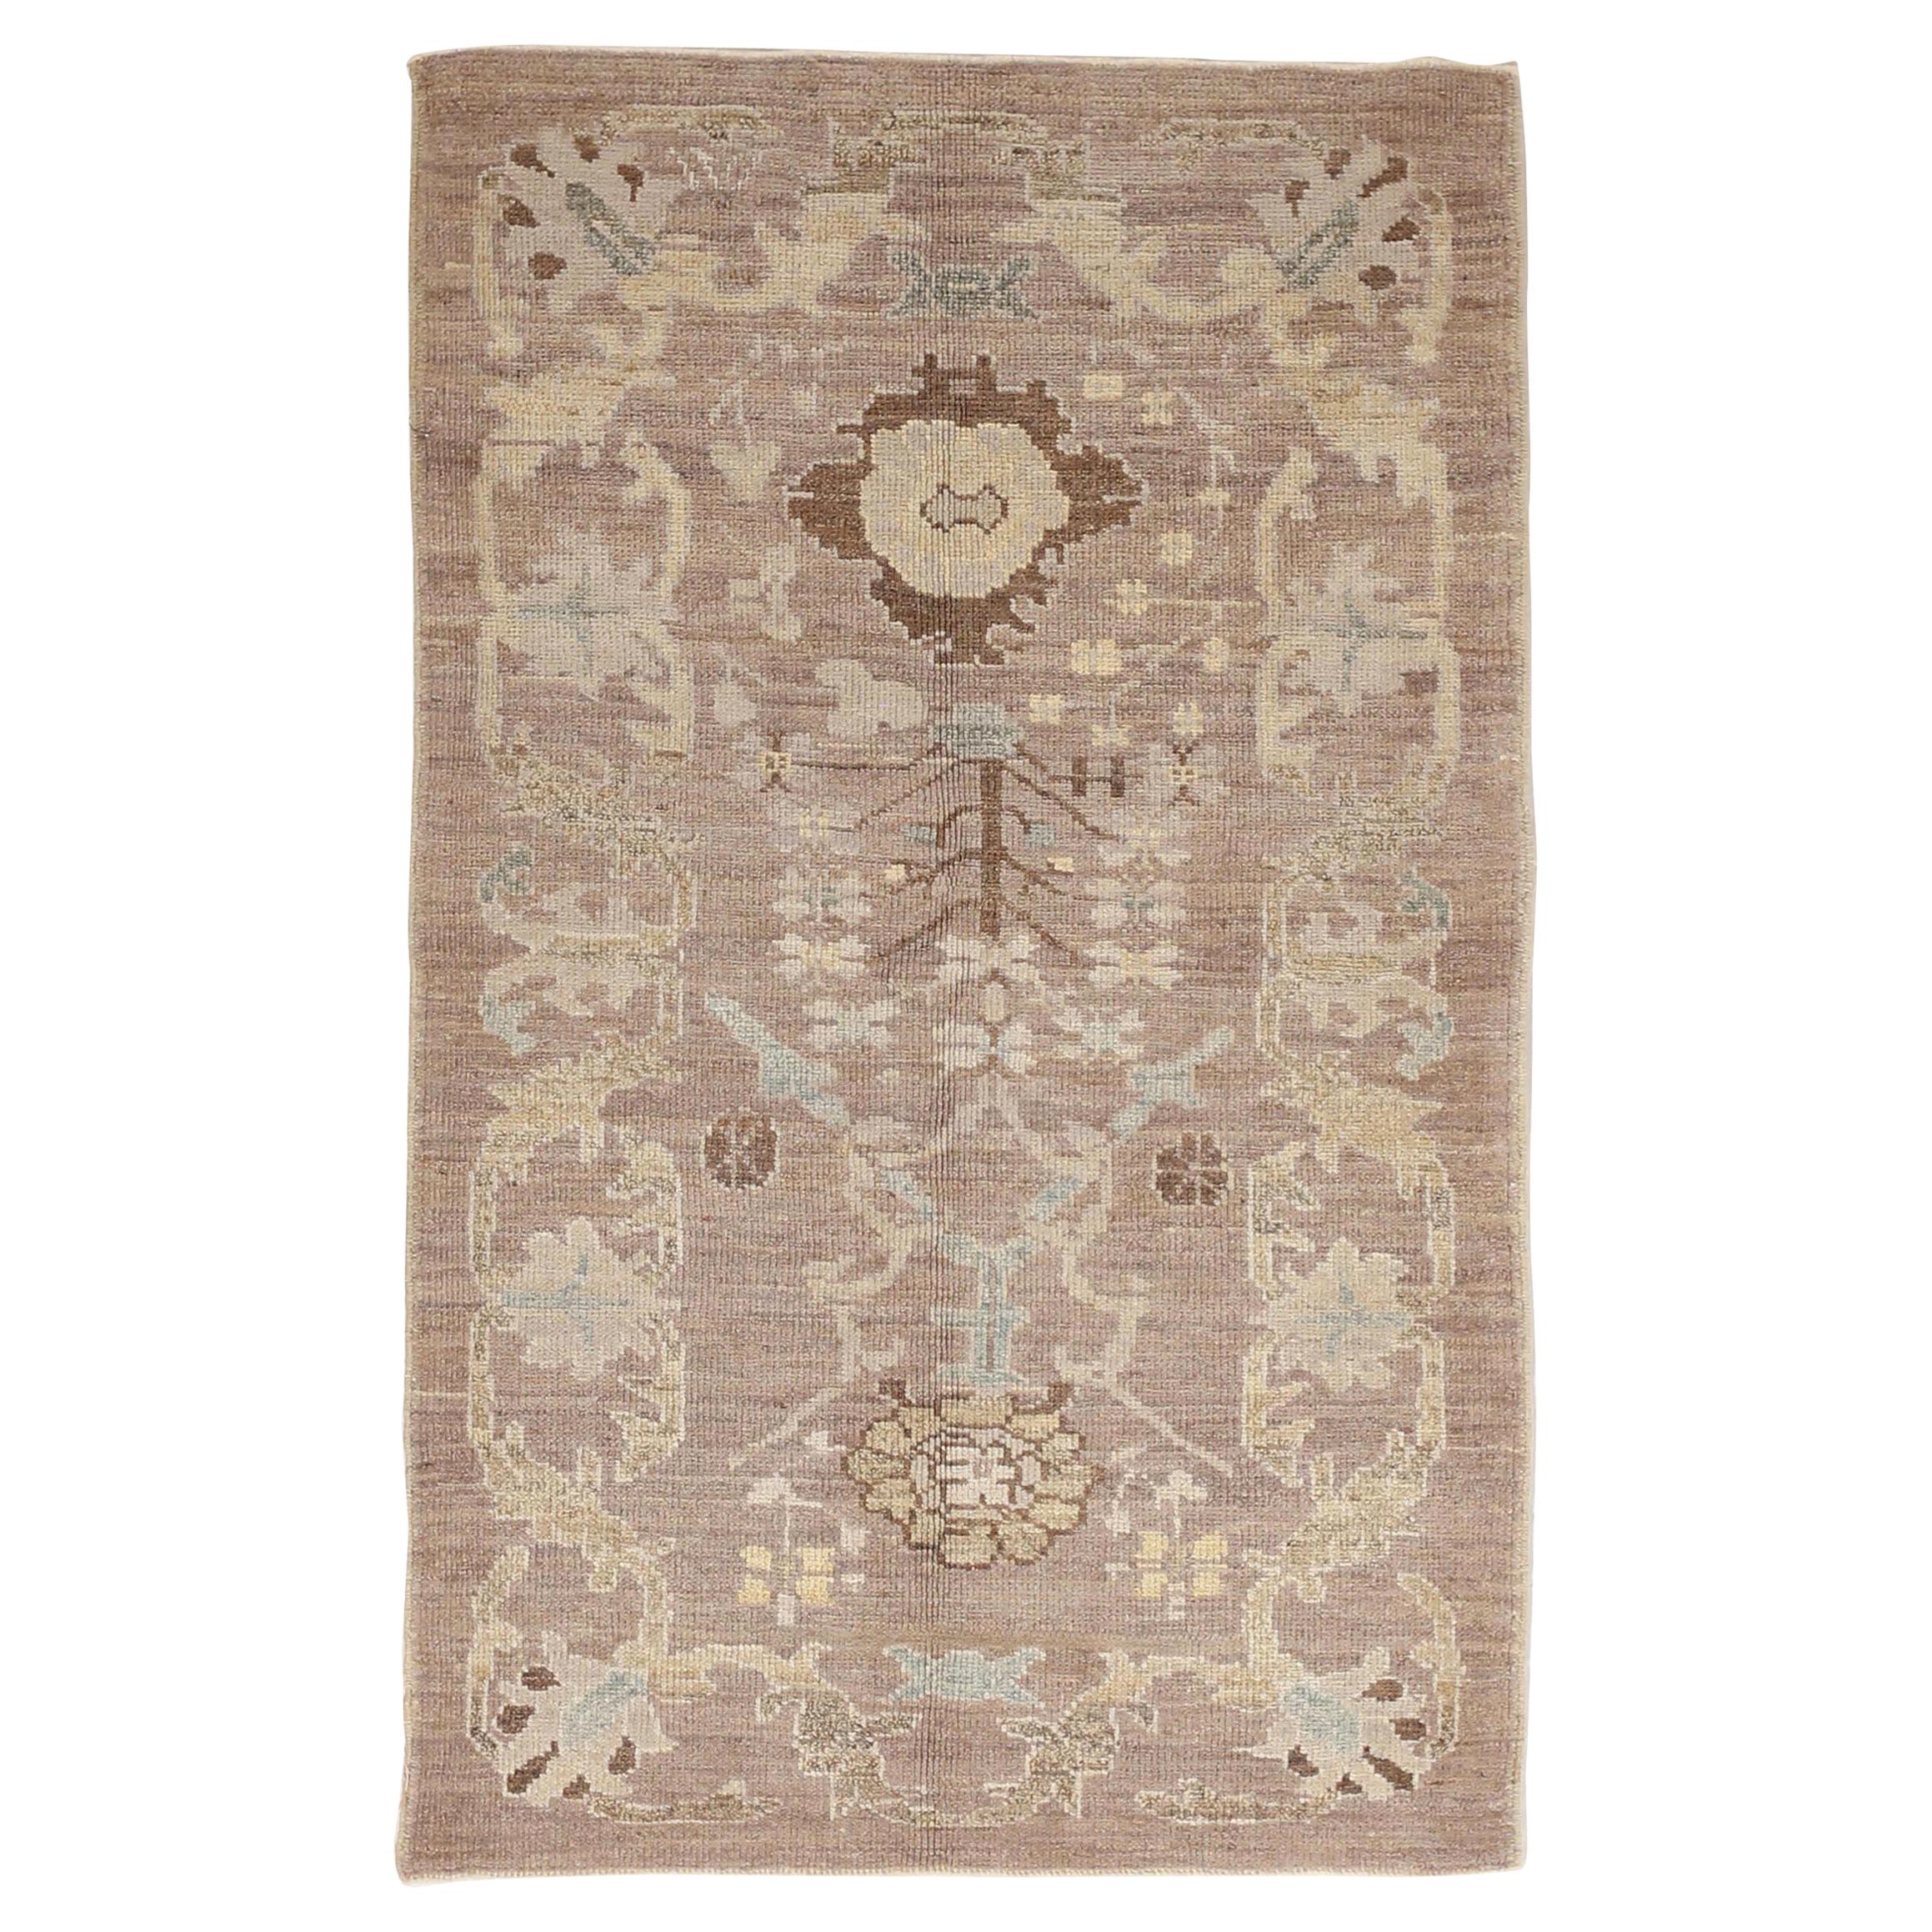 New Oushak Design Persian Rug with Blue and Beige Floral Details